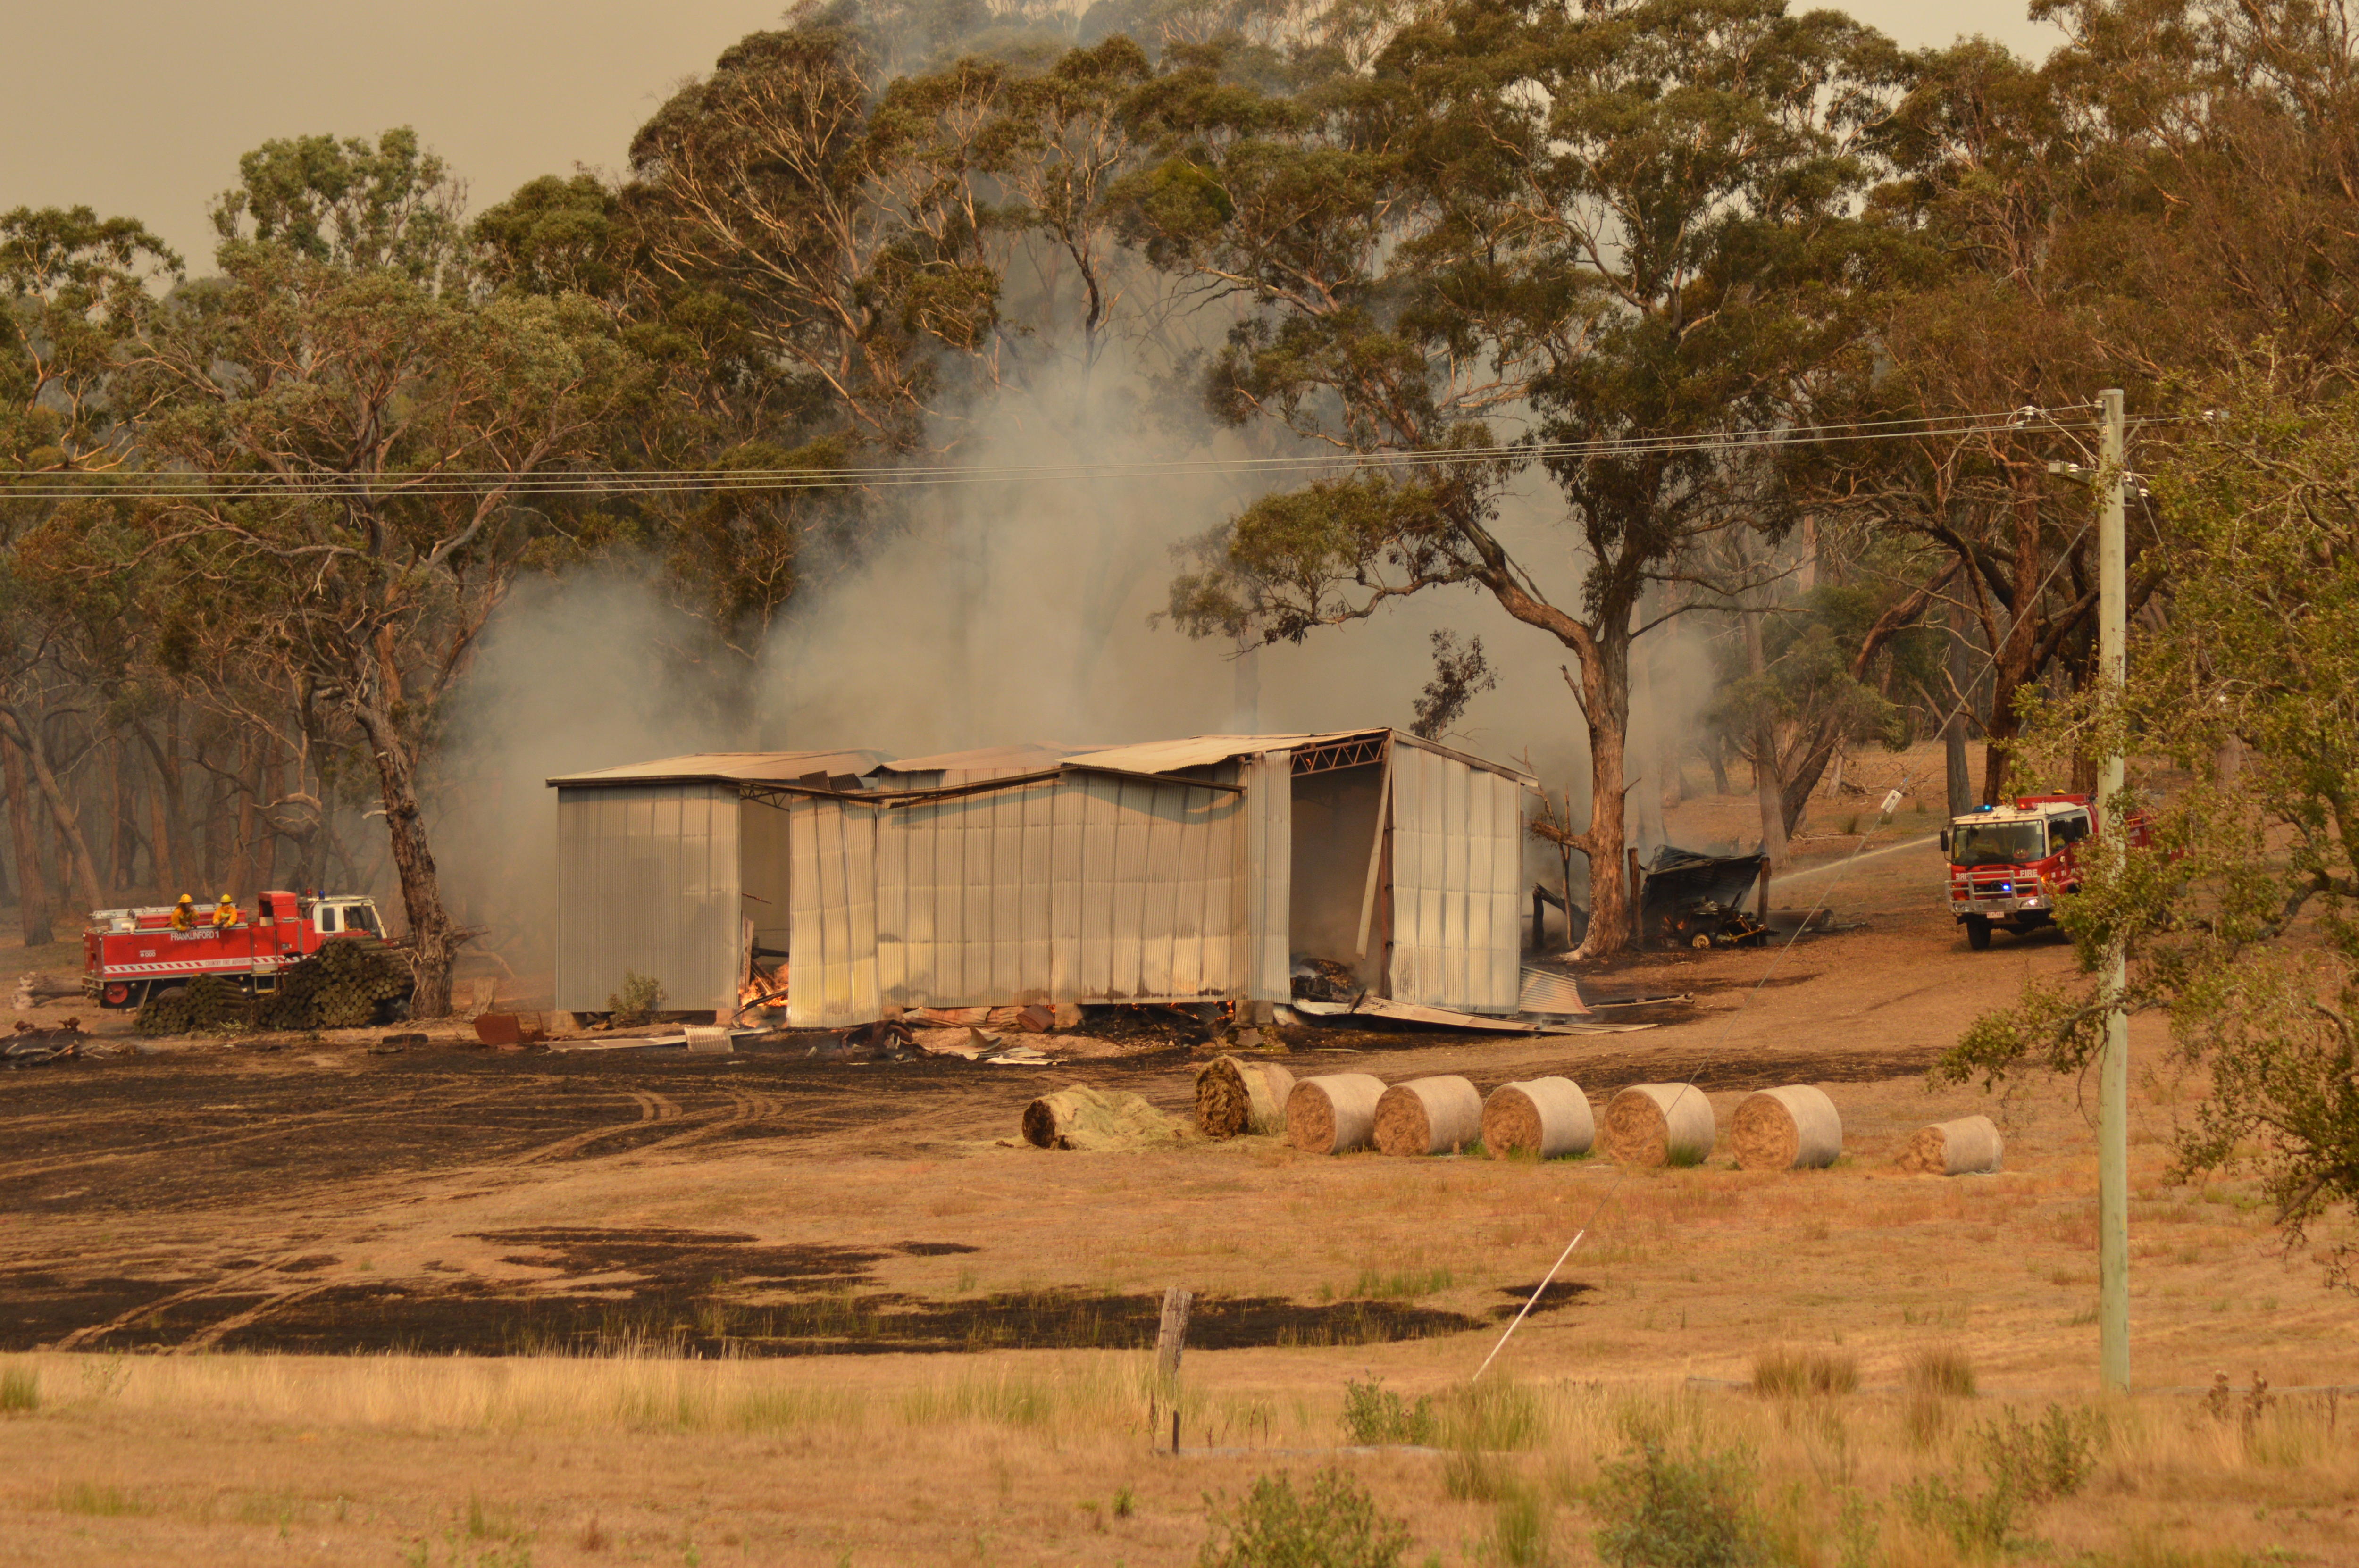 Two fire trucks are parked near a corrugated iron shed which has white smoke rising behind it among trees and brown grass.